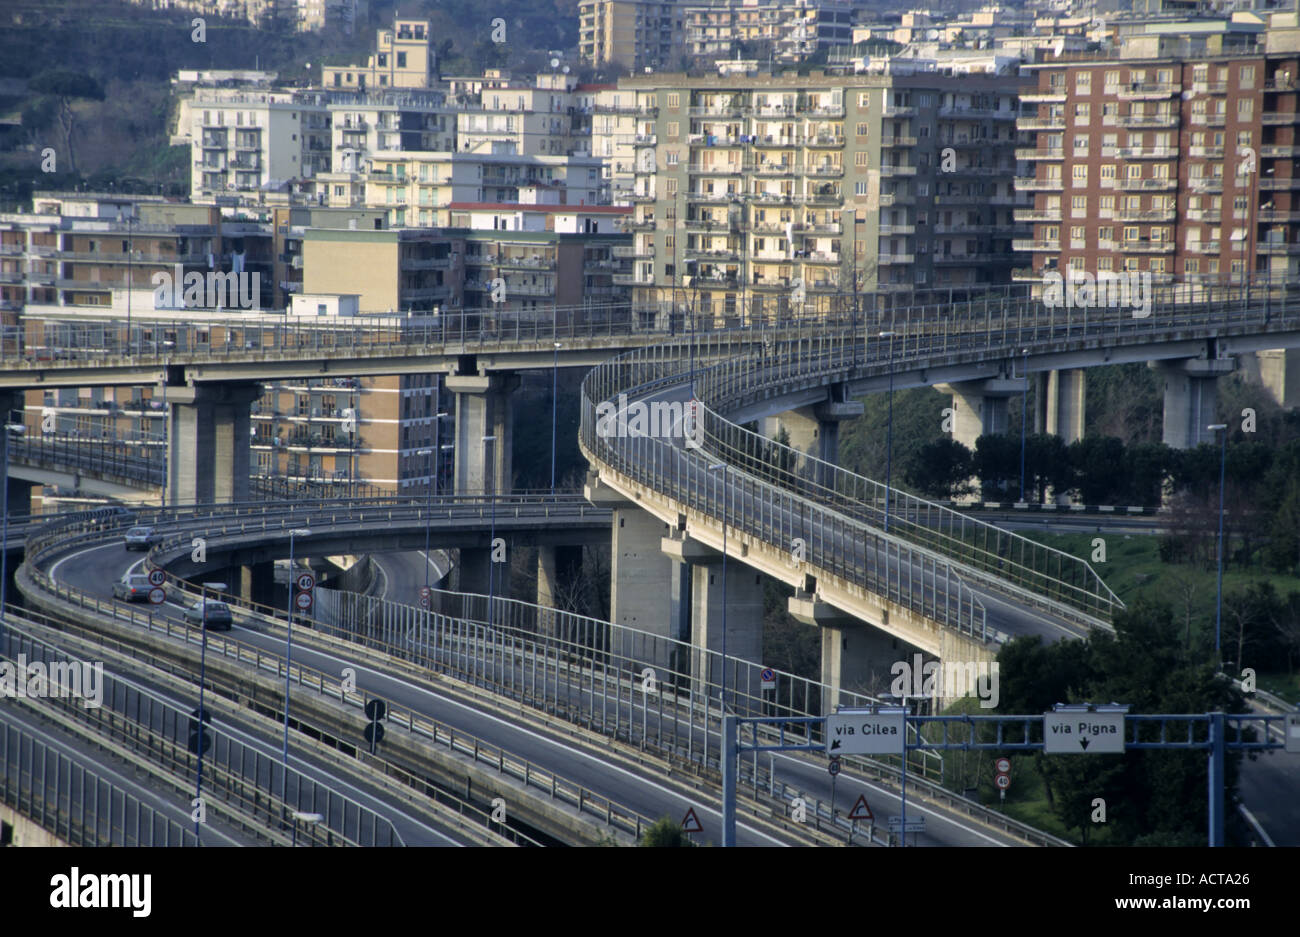 Tangenziale Highway with skyscrapers and high rises in the background, Naples, Italy. Stock Photo